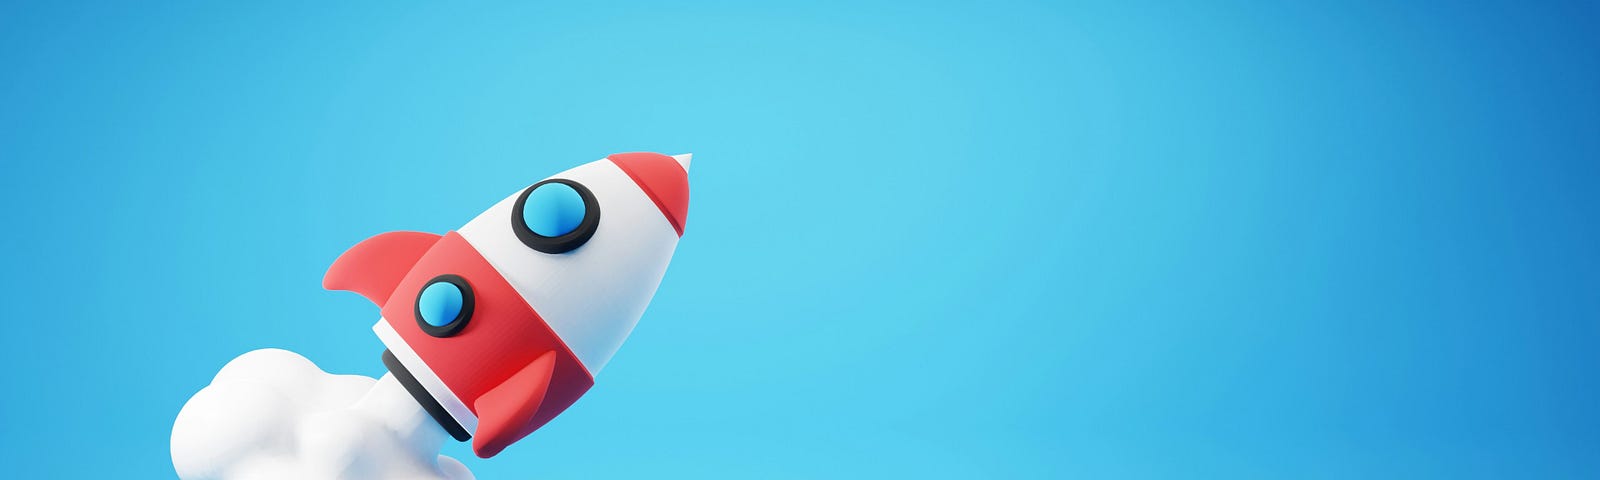 Silly toy rocket chosen for it’s boost potential.